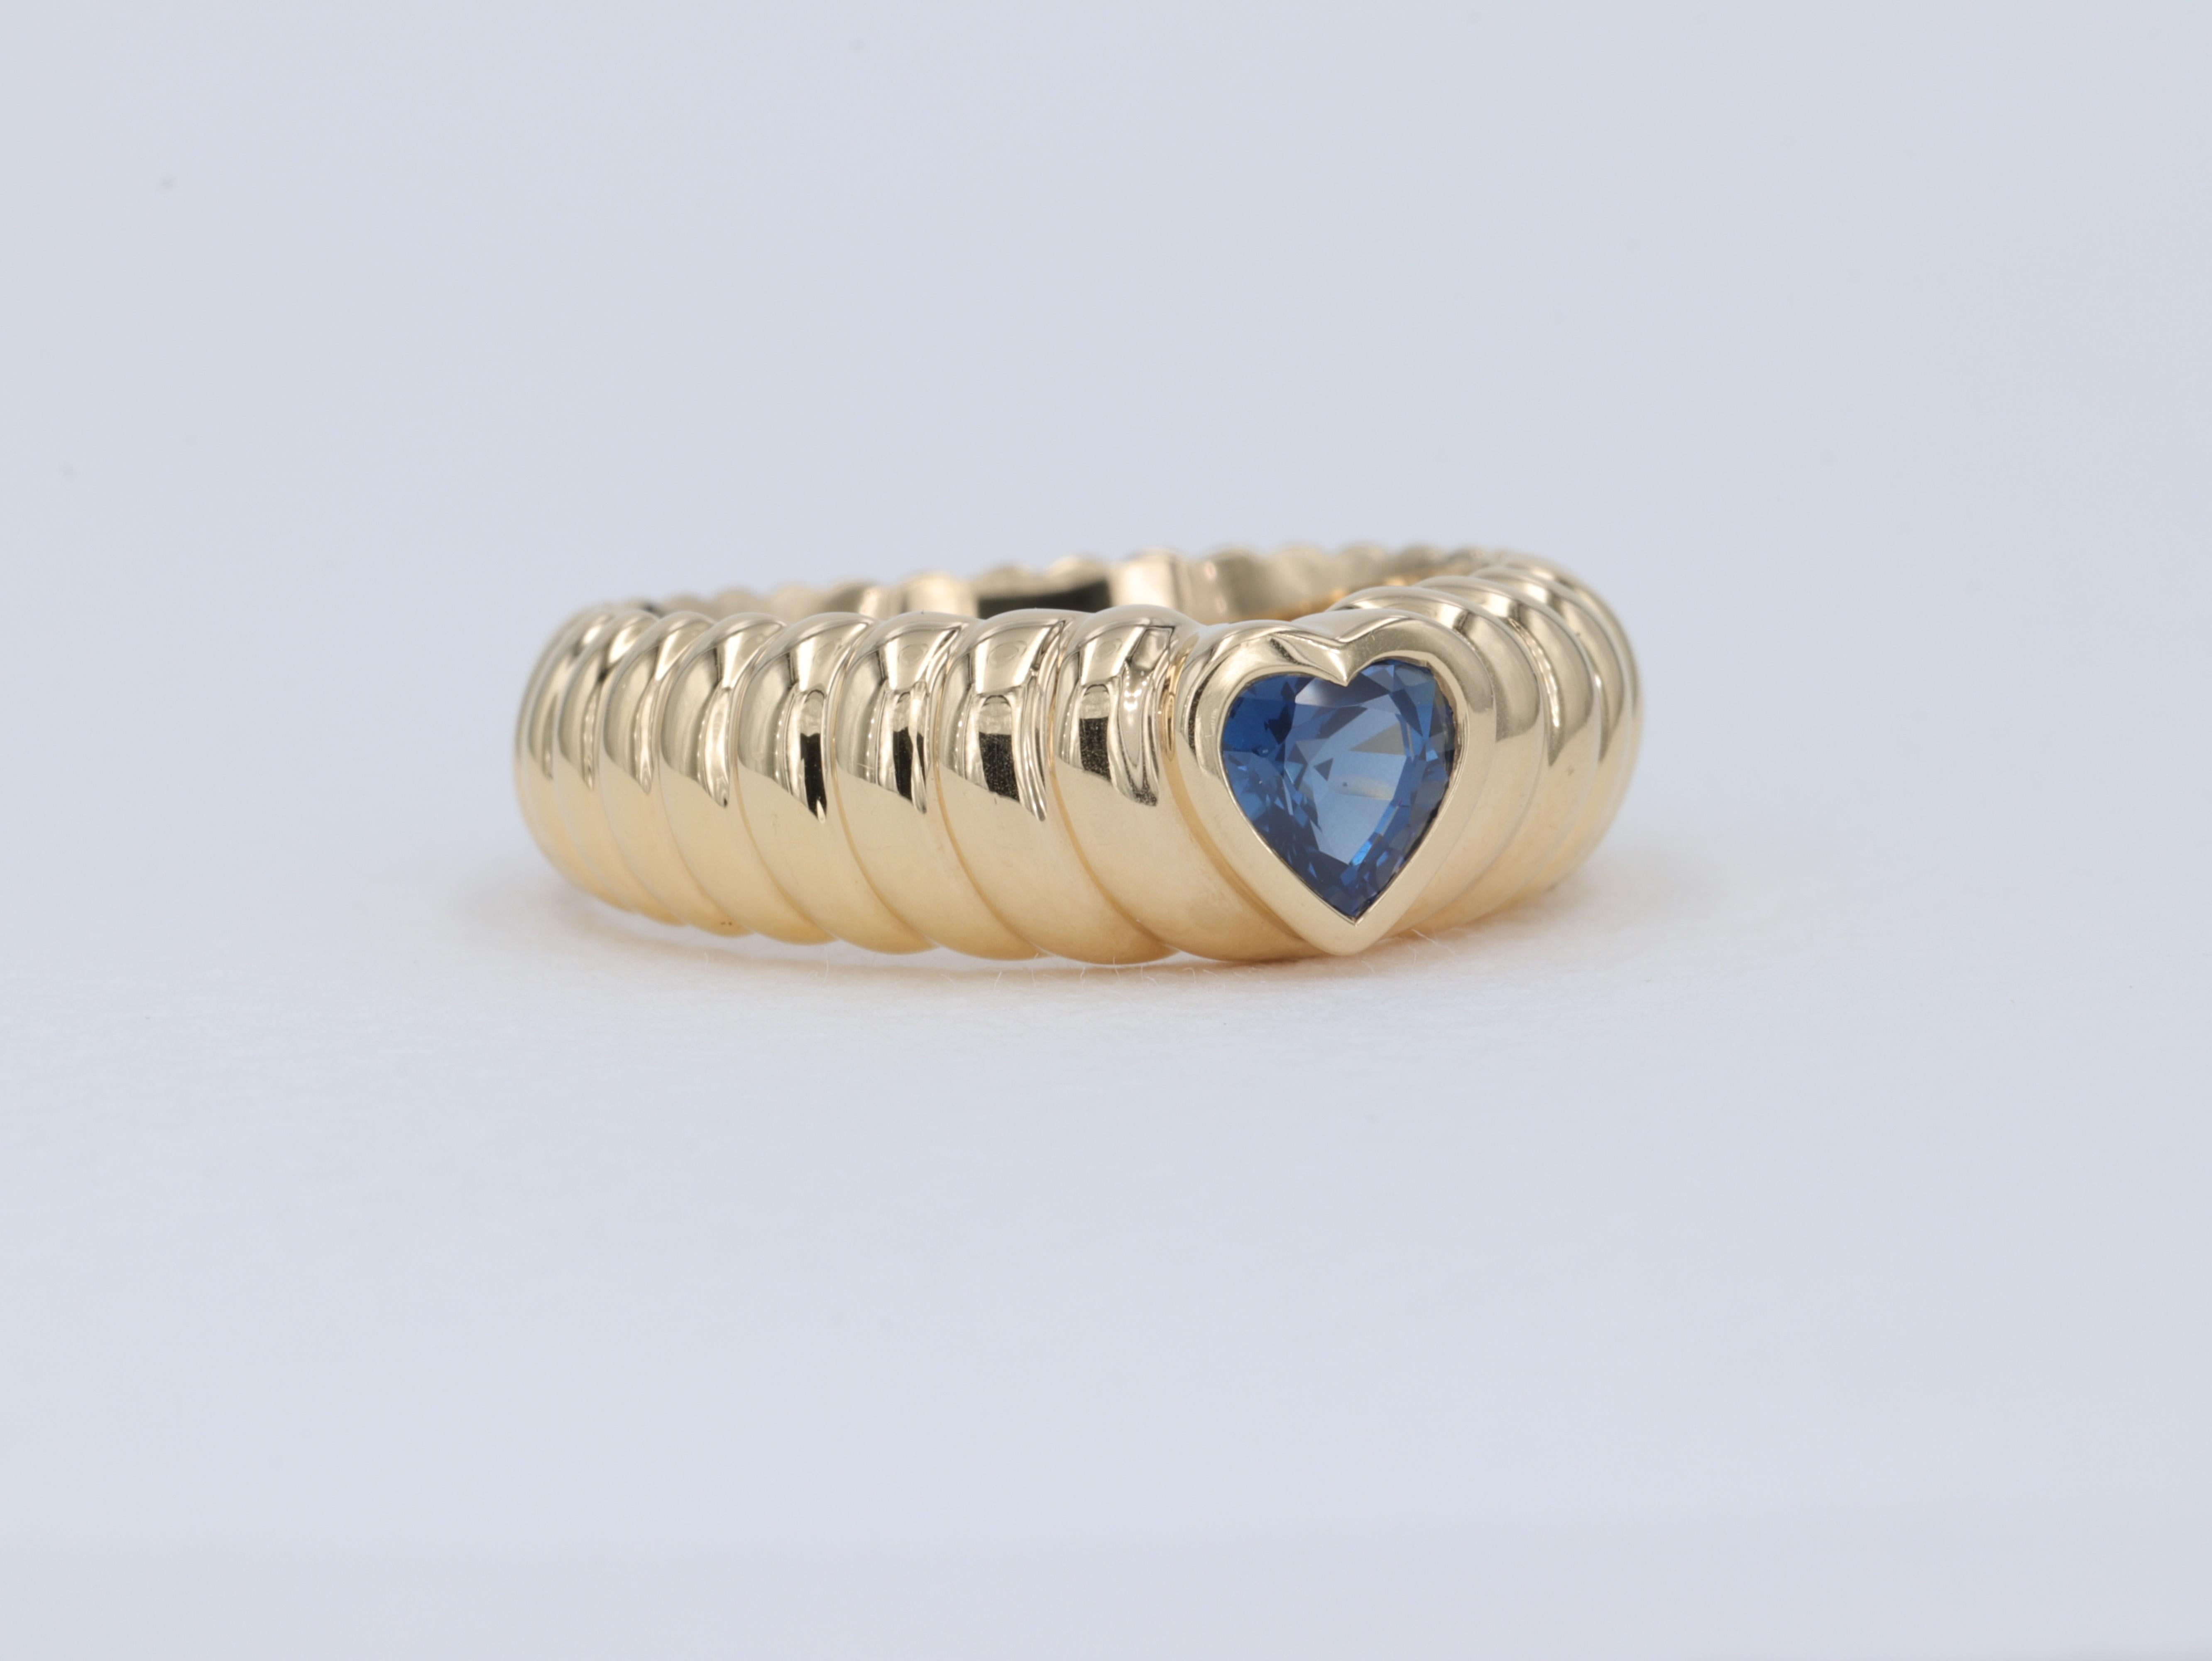 This heart motif ring by Tiffany & Co. features a heart shape blue sapphire center stone with a domed finish that gives the appearance of waves moving away from the center stone. 

The sapphire is a vivid blue color and weighs approximately .50